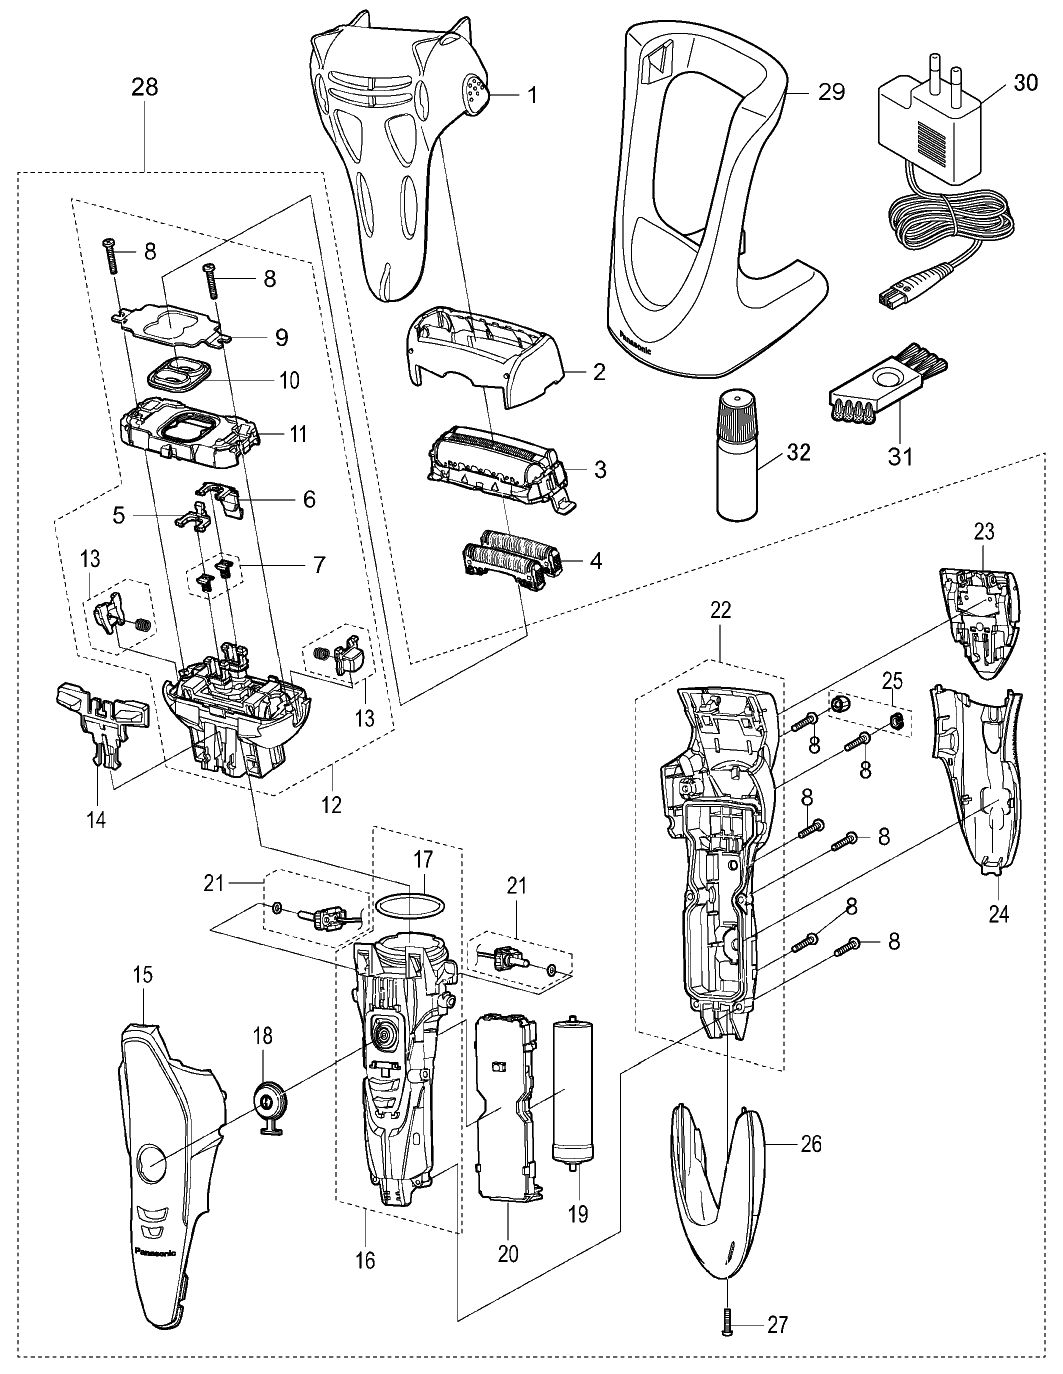 ES-ST25: Exploded View